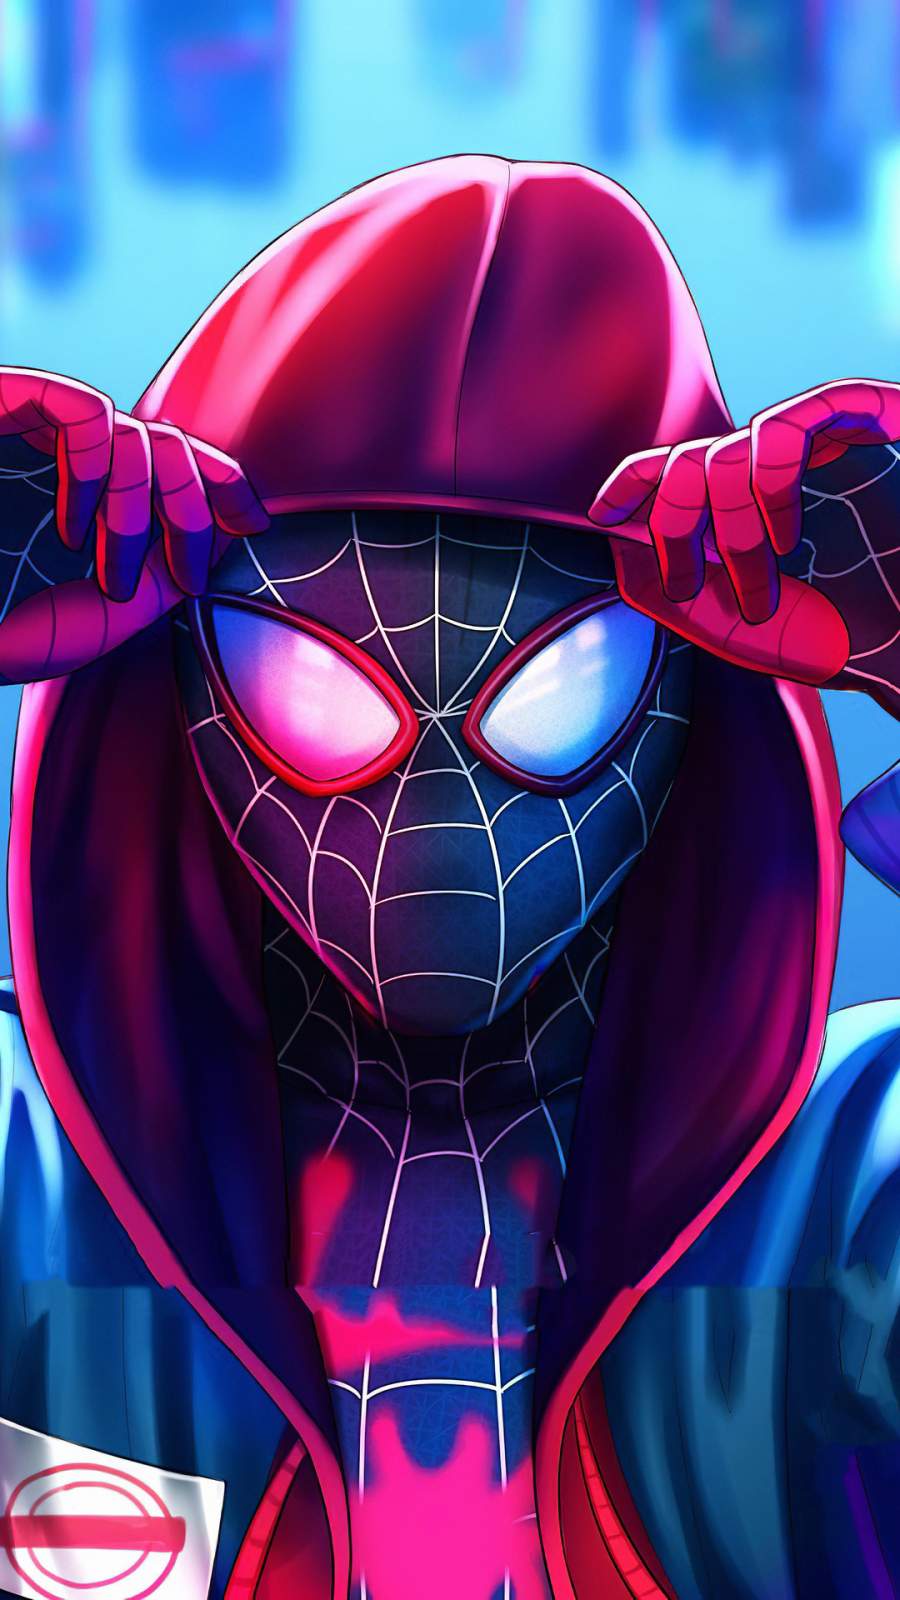 100+] Spider Man Iphone Wallpapers | Wallpapers.com